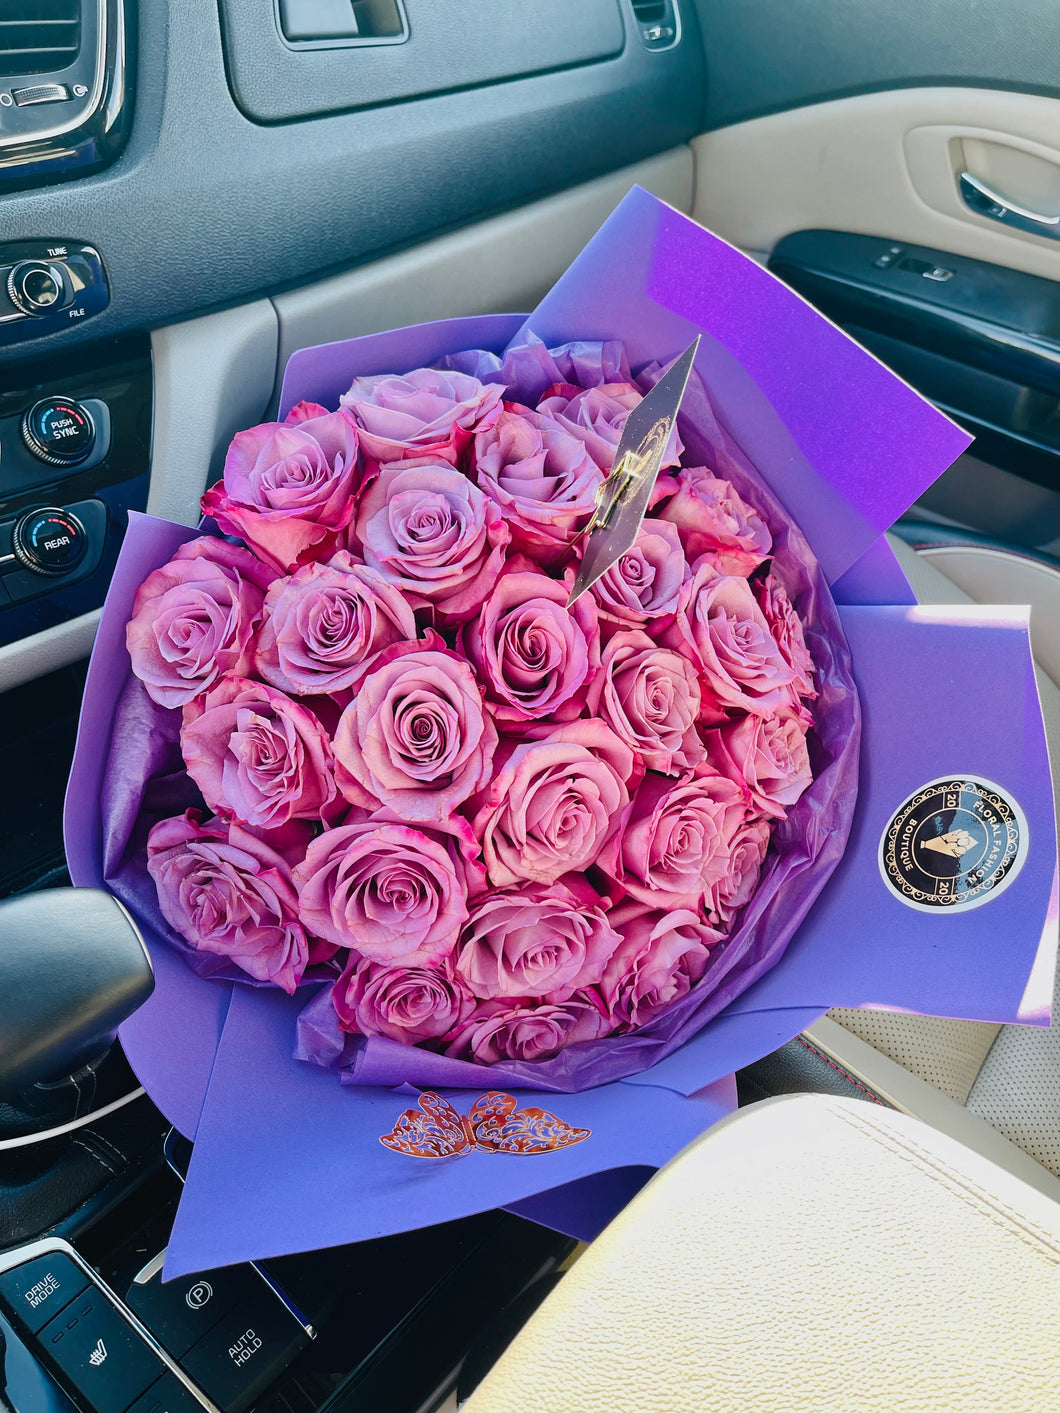 25 lilac roses